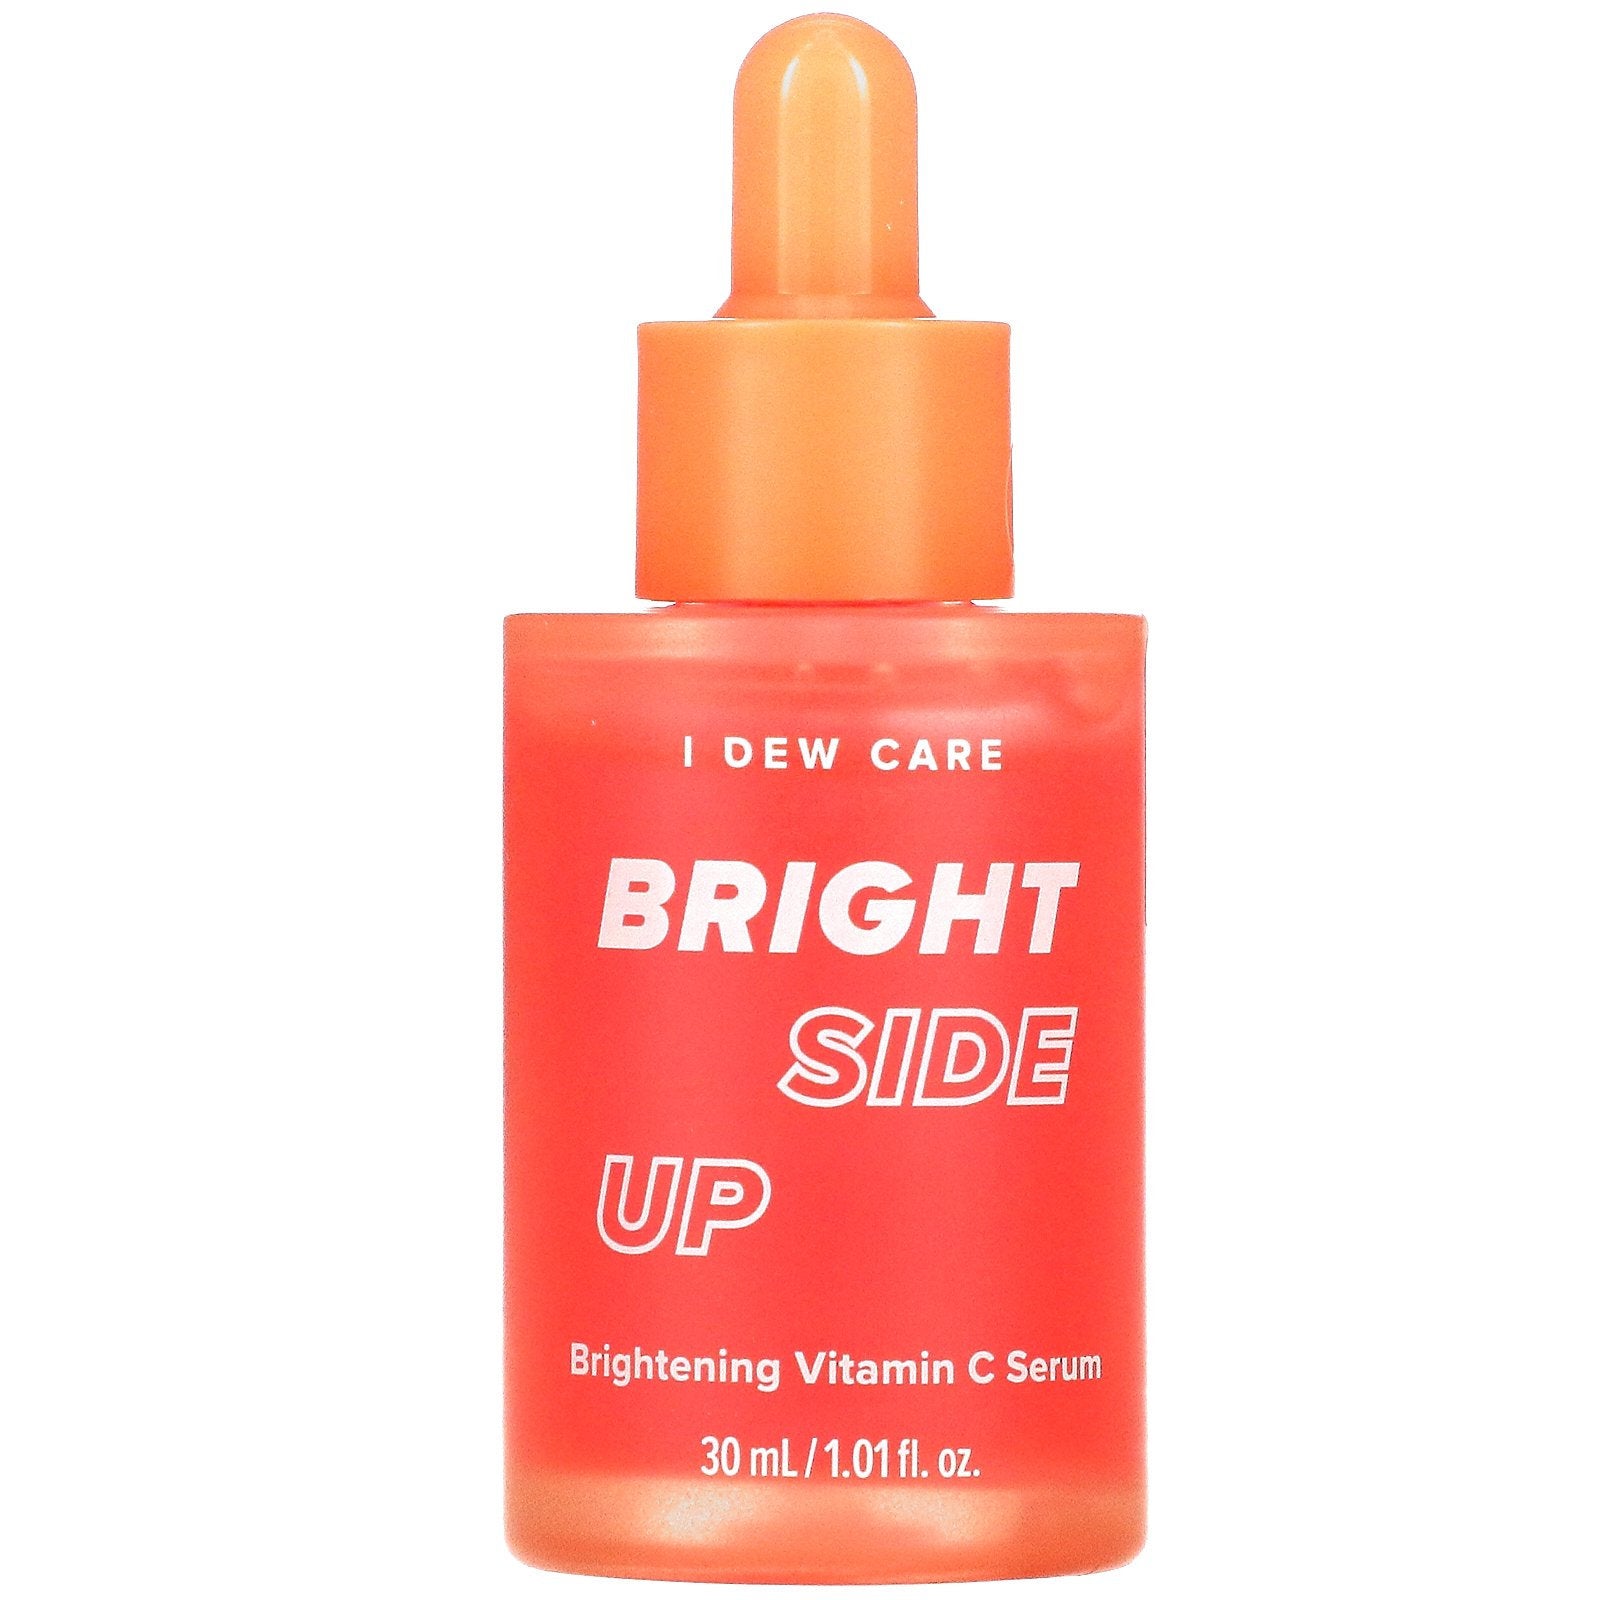 I DEW CARE - Bright Side Up Serum (Discounted)